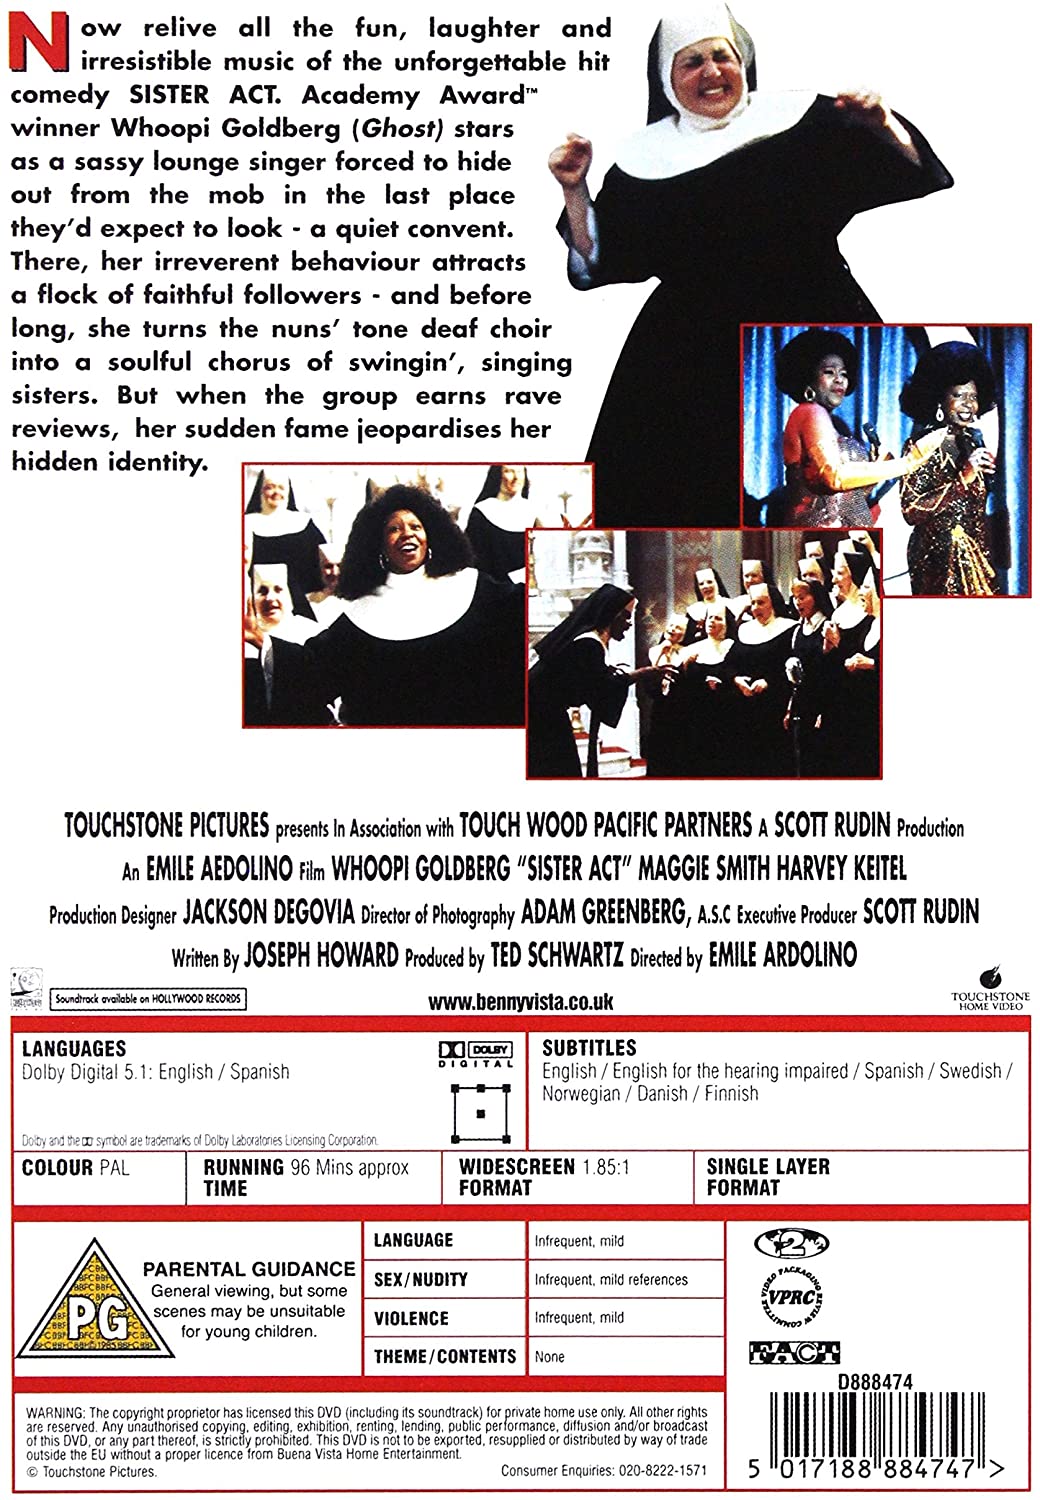 Sister Act [1992] - Comedy/Music [DVD]